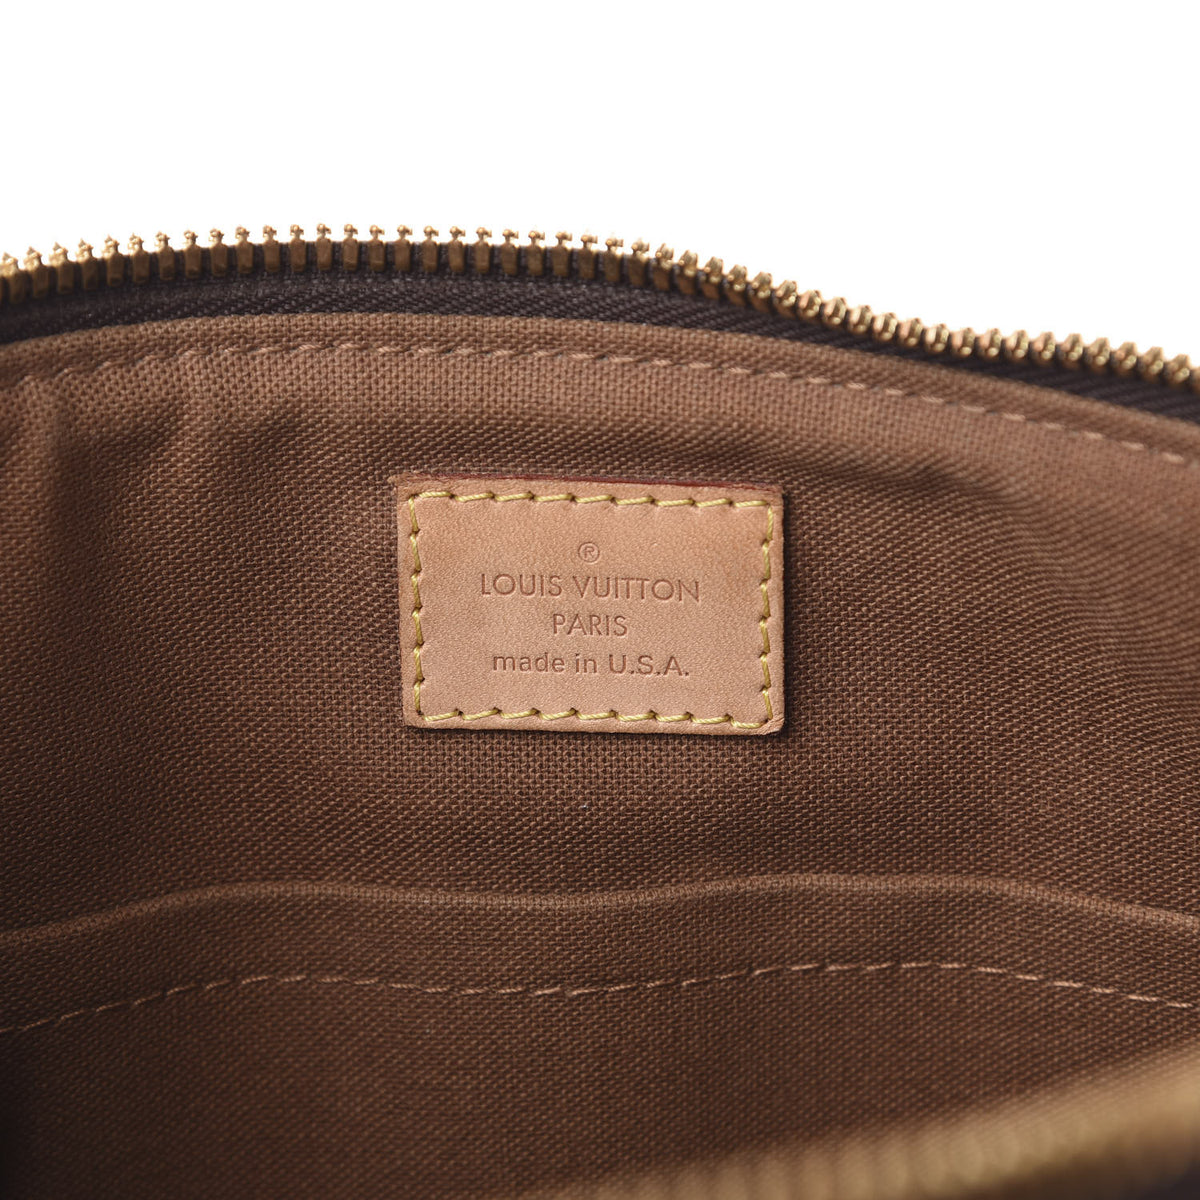 Here's an up close shot of the gorgeous Louis Vuitton Palermo PM